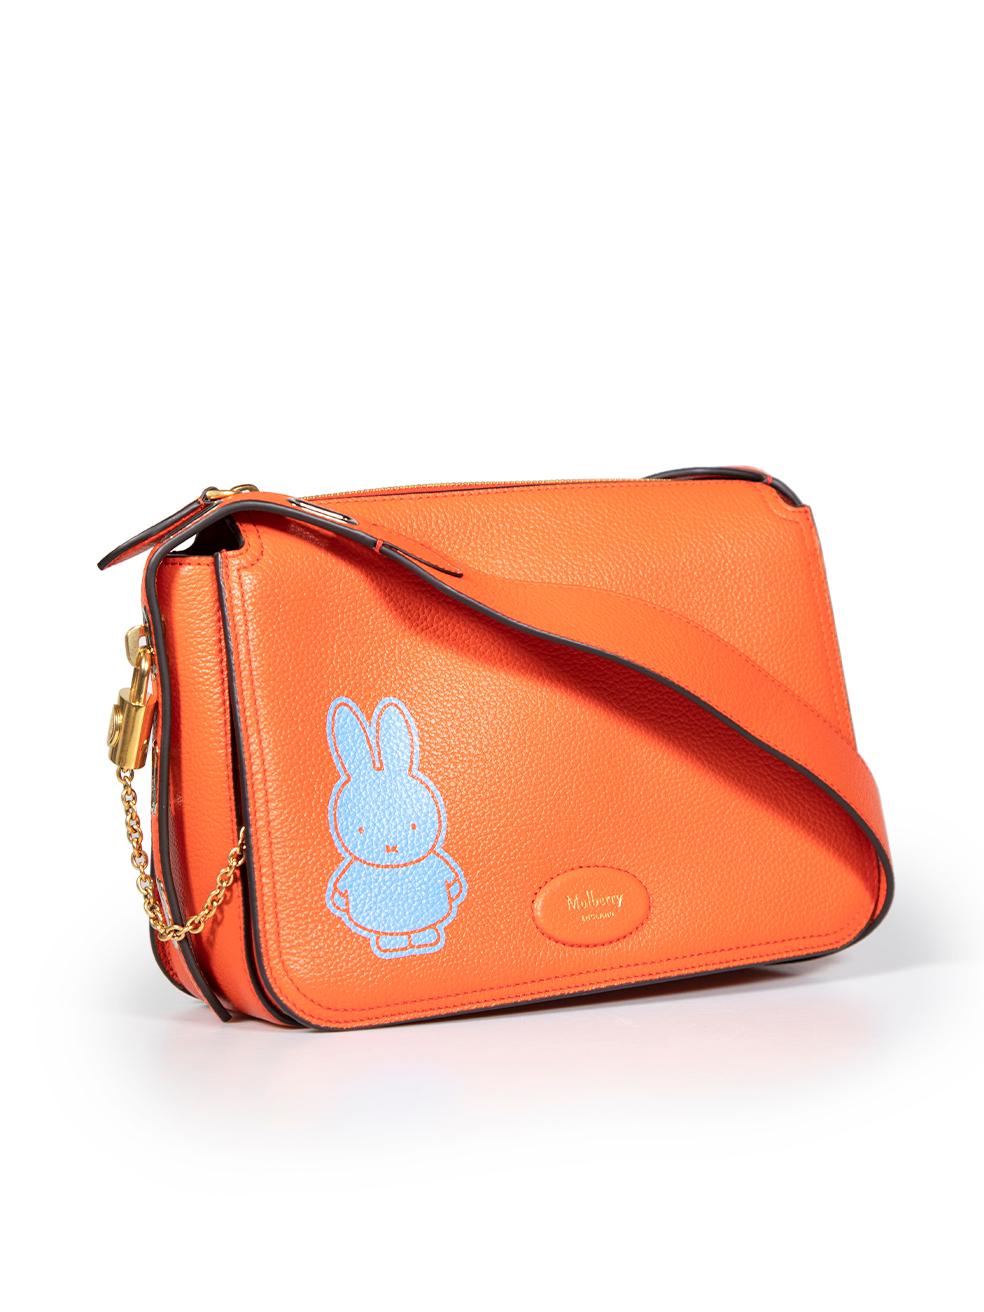 CONDITION is Never worn, with tags. No visible wear to bag is evident on this new Mulberry x Miffy designer resale item. This item comes with original dust bag.
 
 
 
 Details
 
 
 Mulberry x Miffy
 
 Model: Billie
 
 Orange
 
 Leather
 
 Crossbody